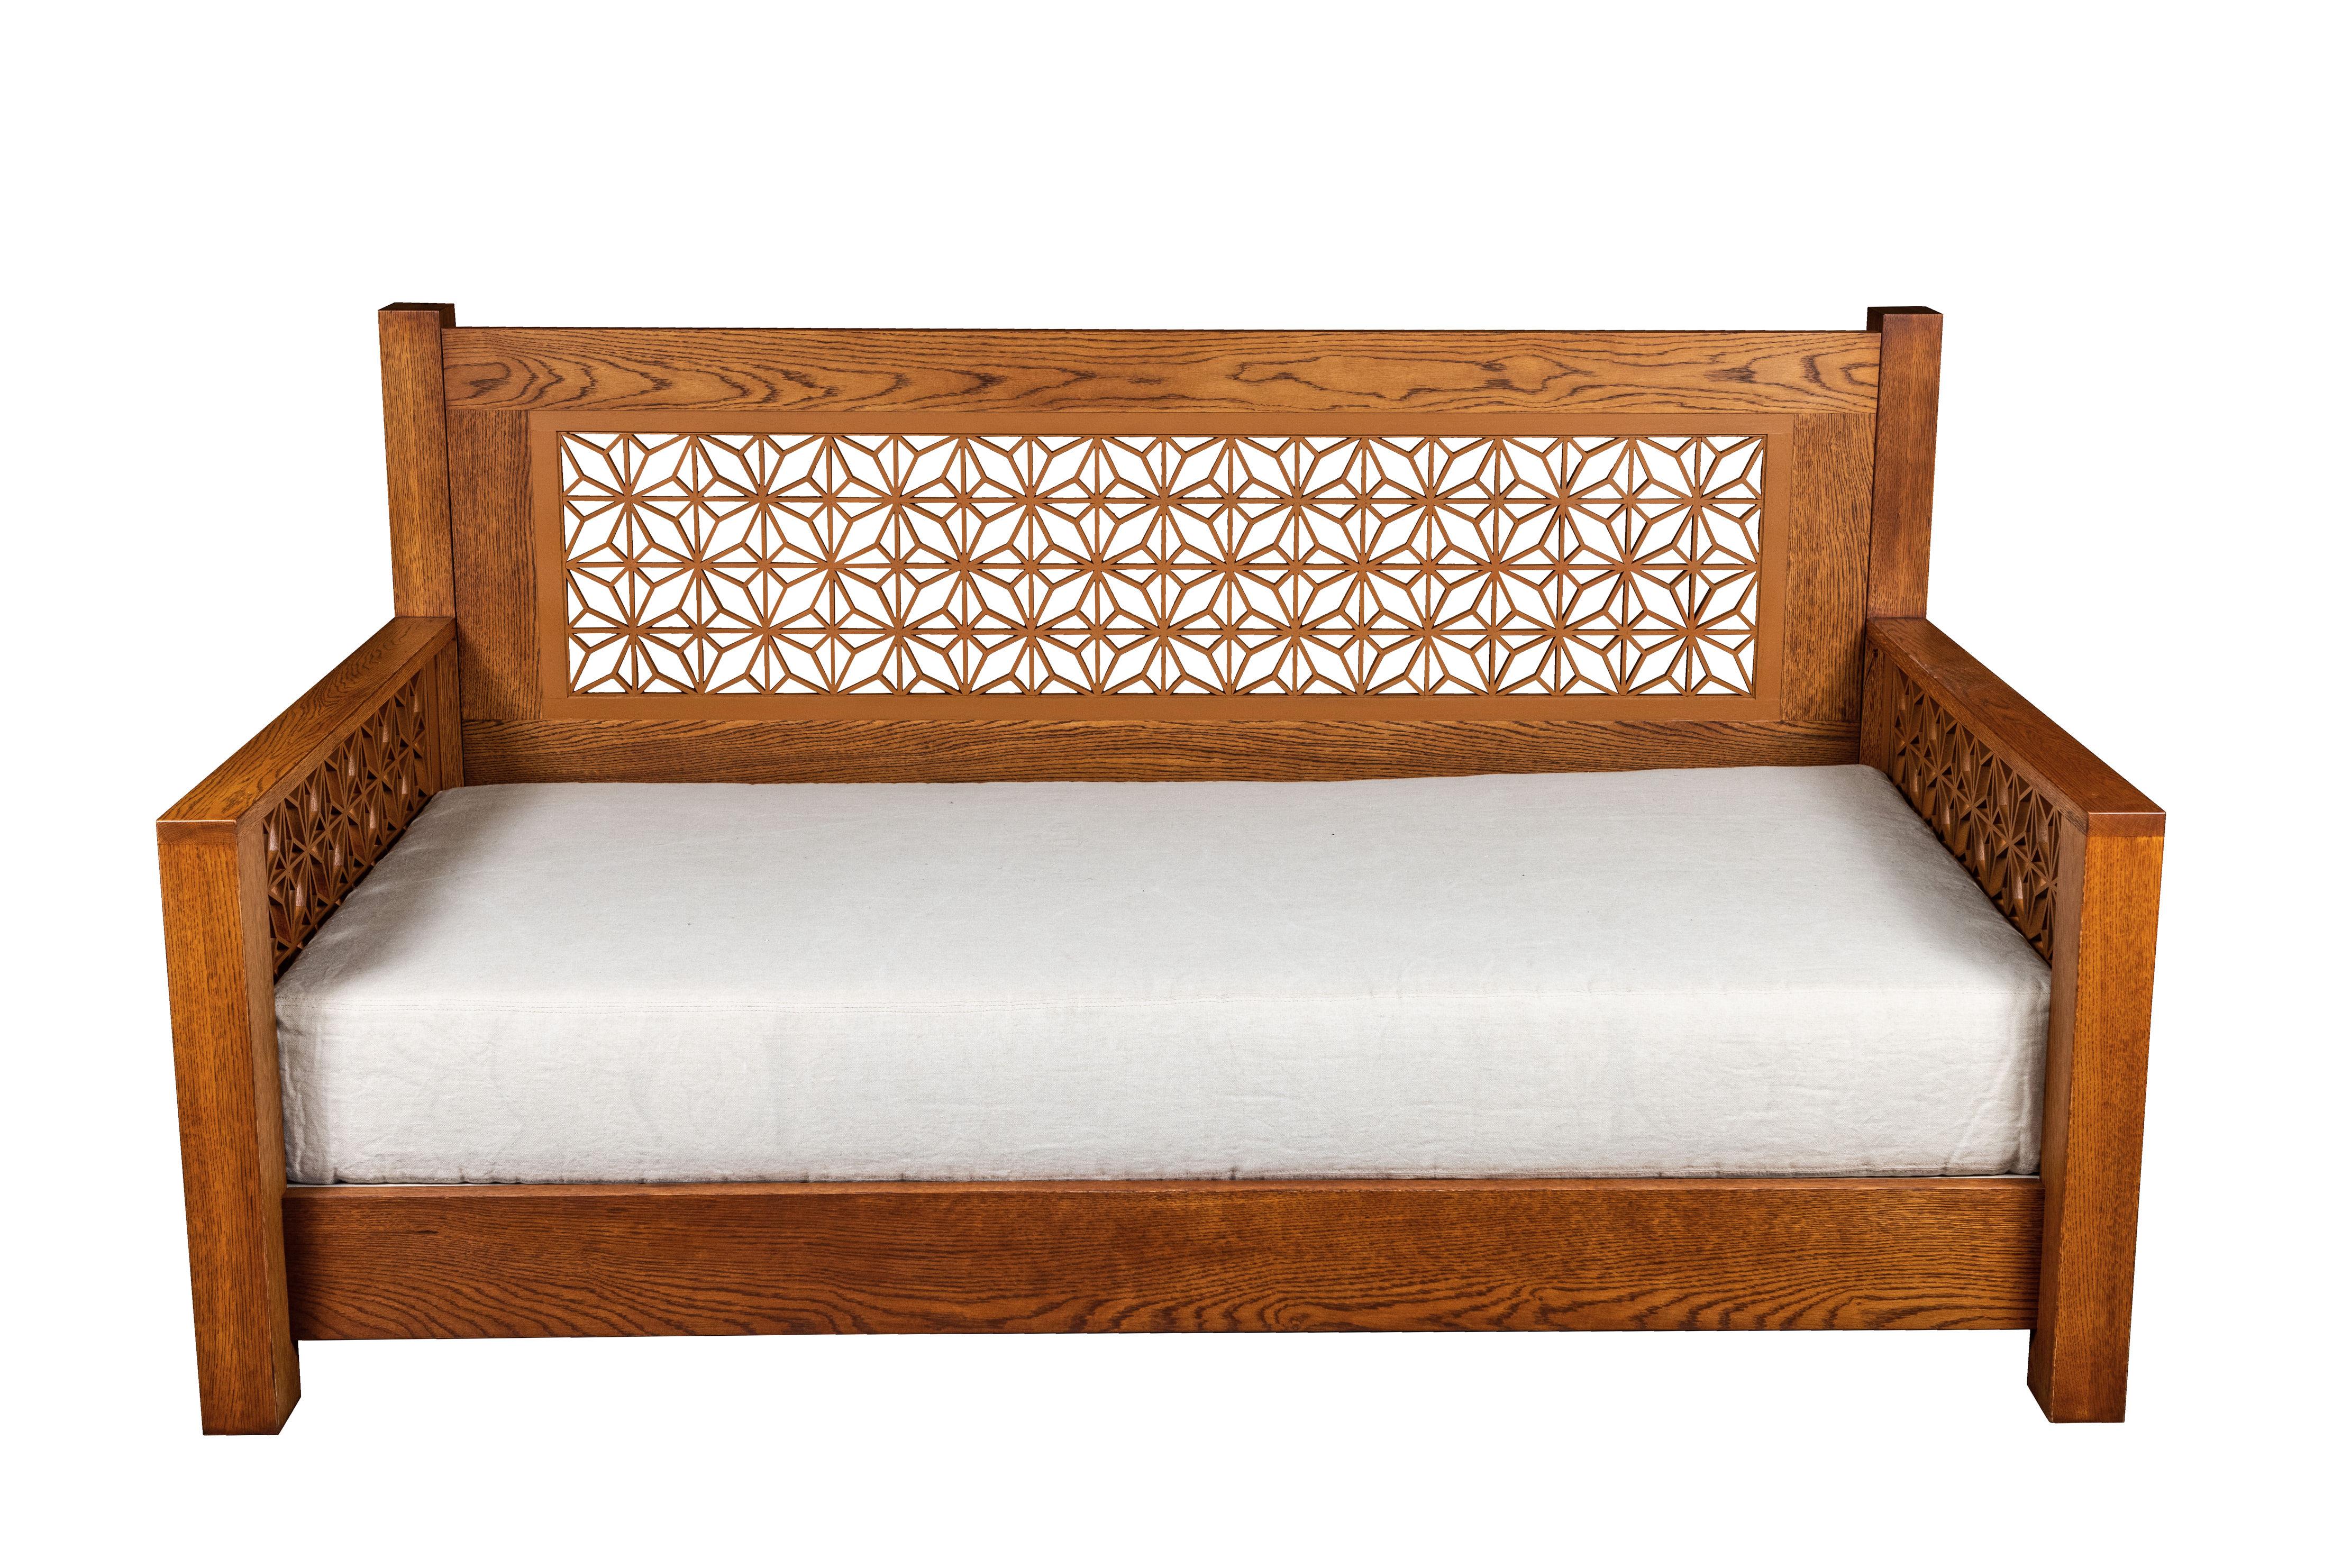 Custom daybed frame made from white oak with mid century teak Kumiko panels on side and back. The Dacron wrapped foam mattress has a flax linen cover.